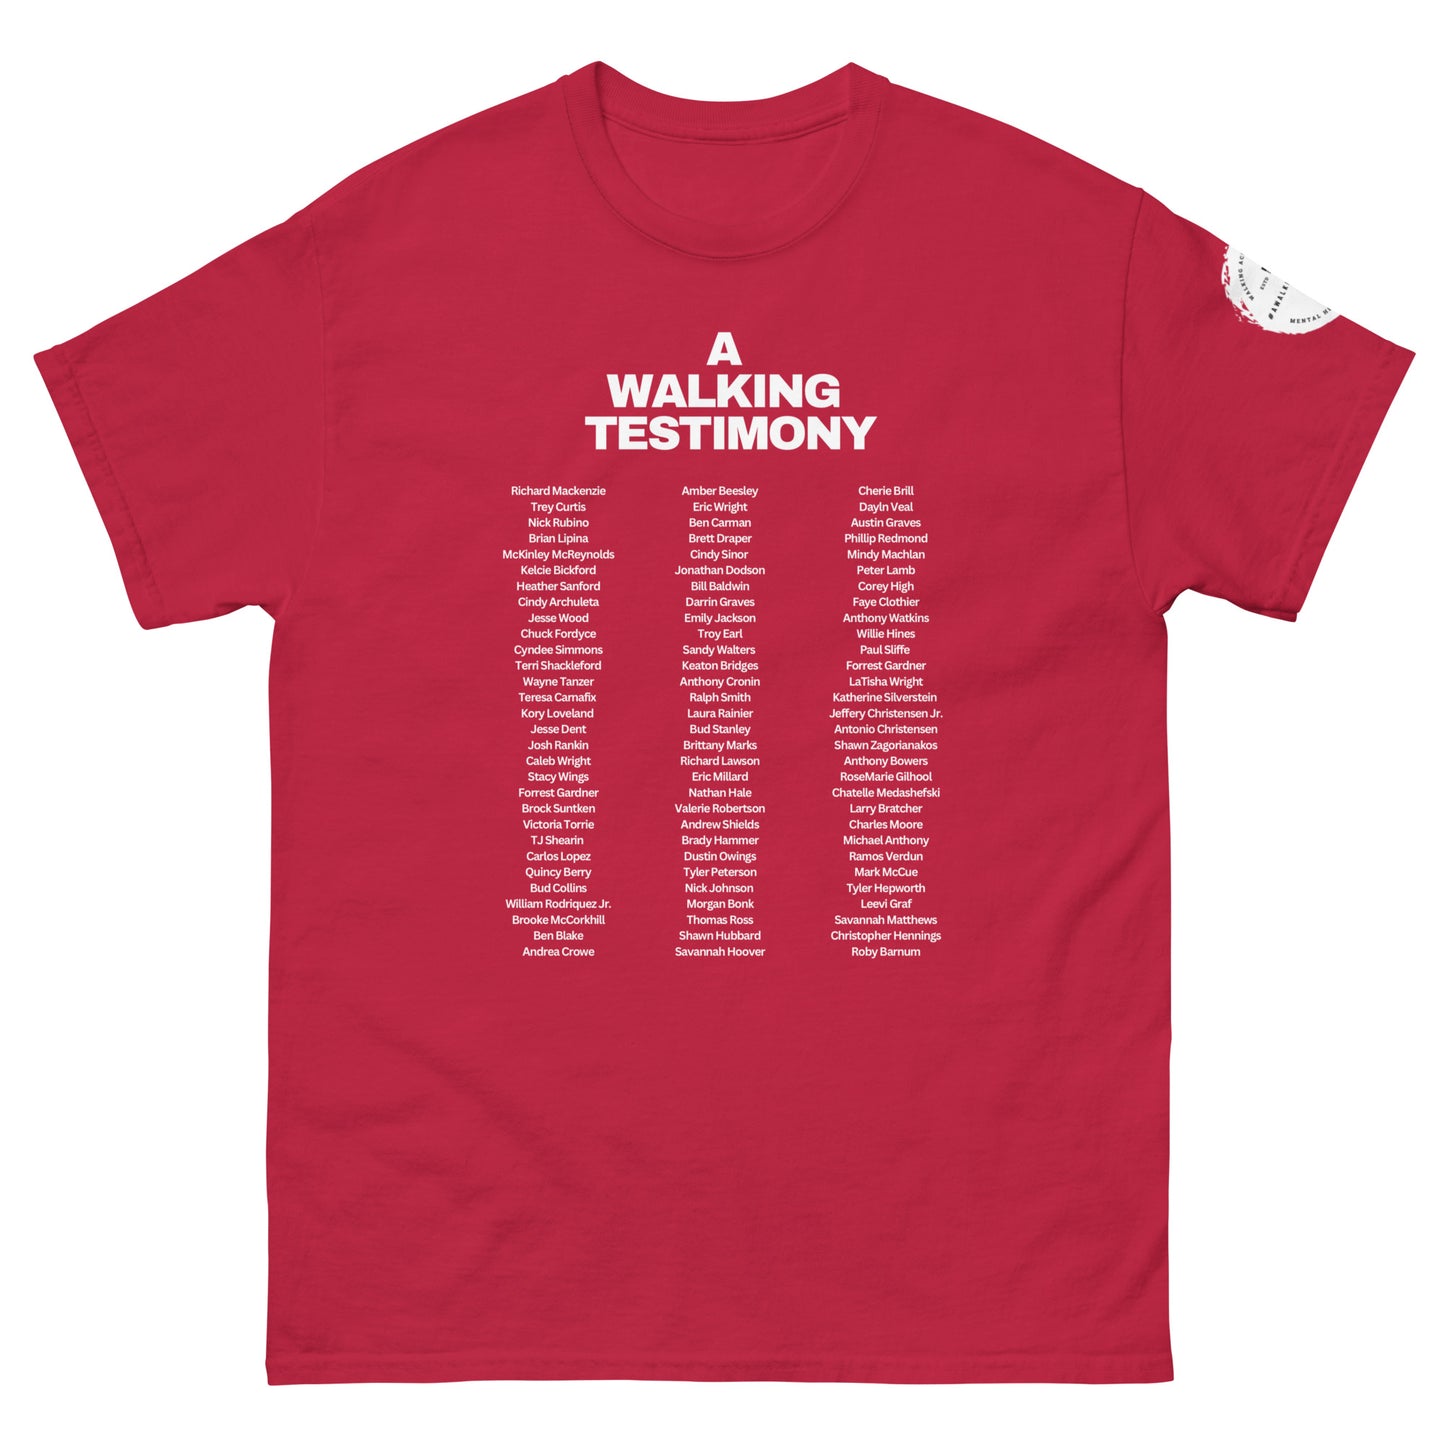 Official A Walking Testimony shirt Edition 4 (dark colors)